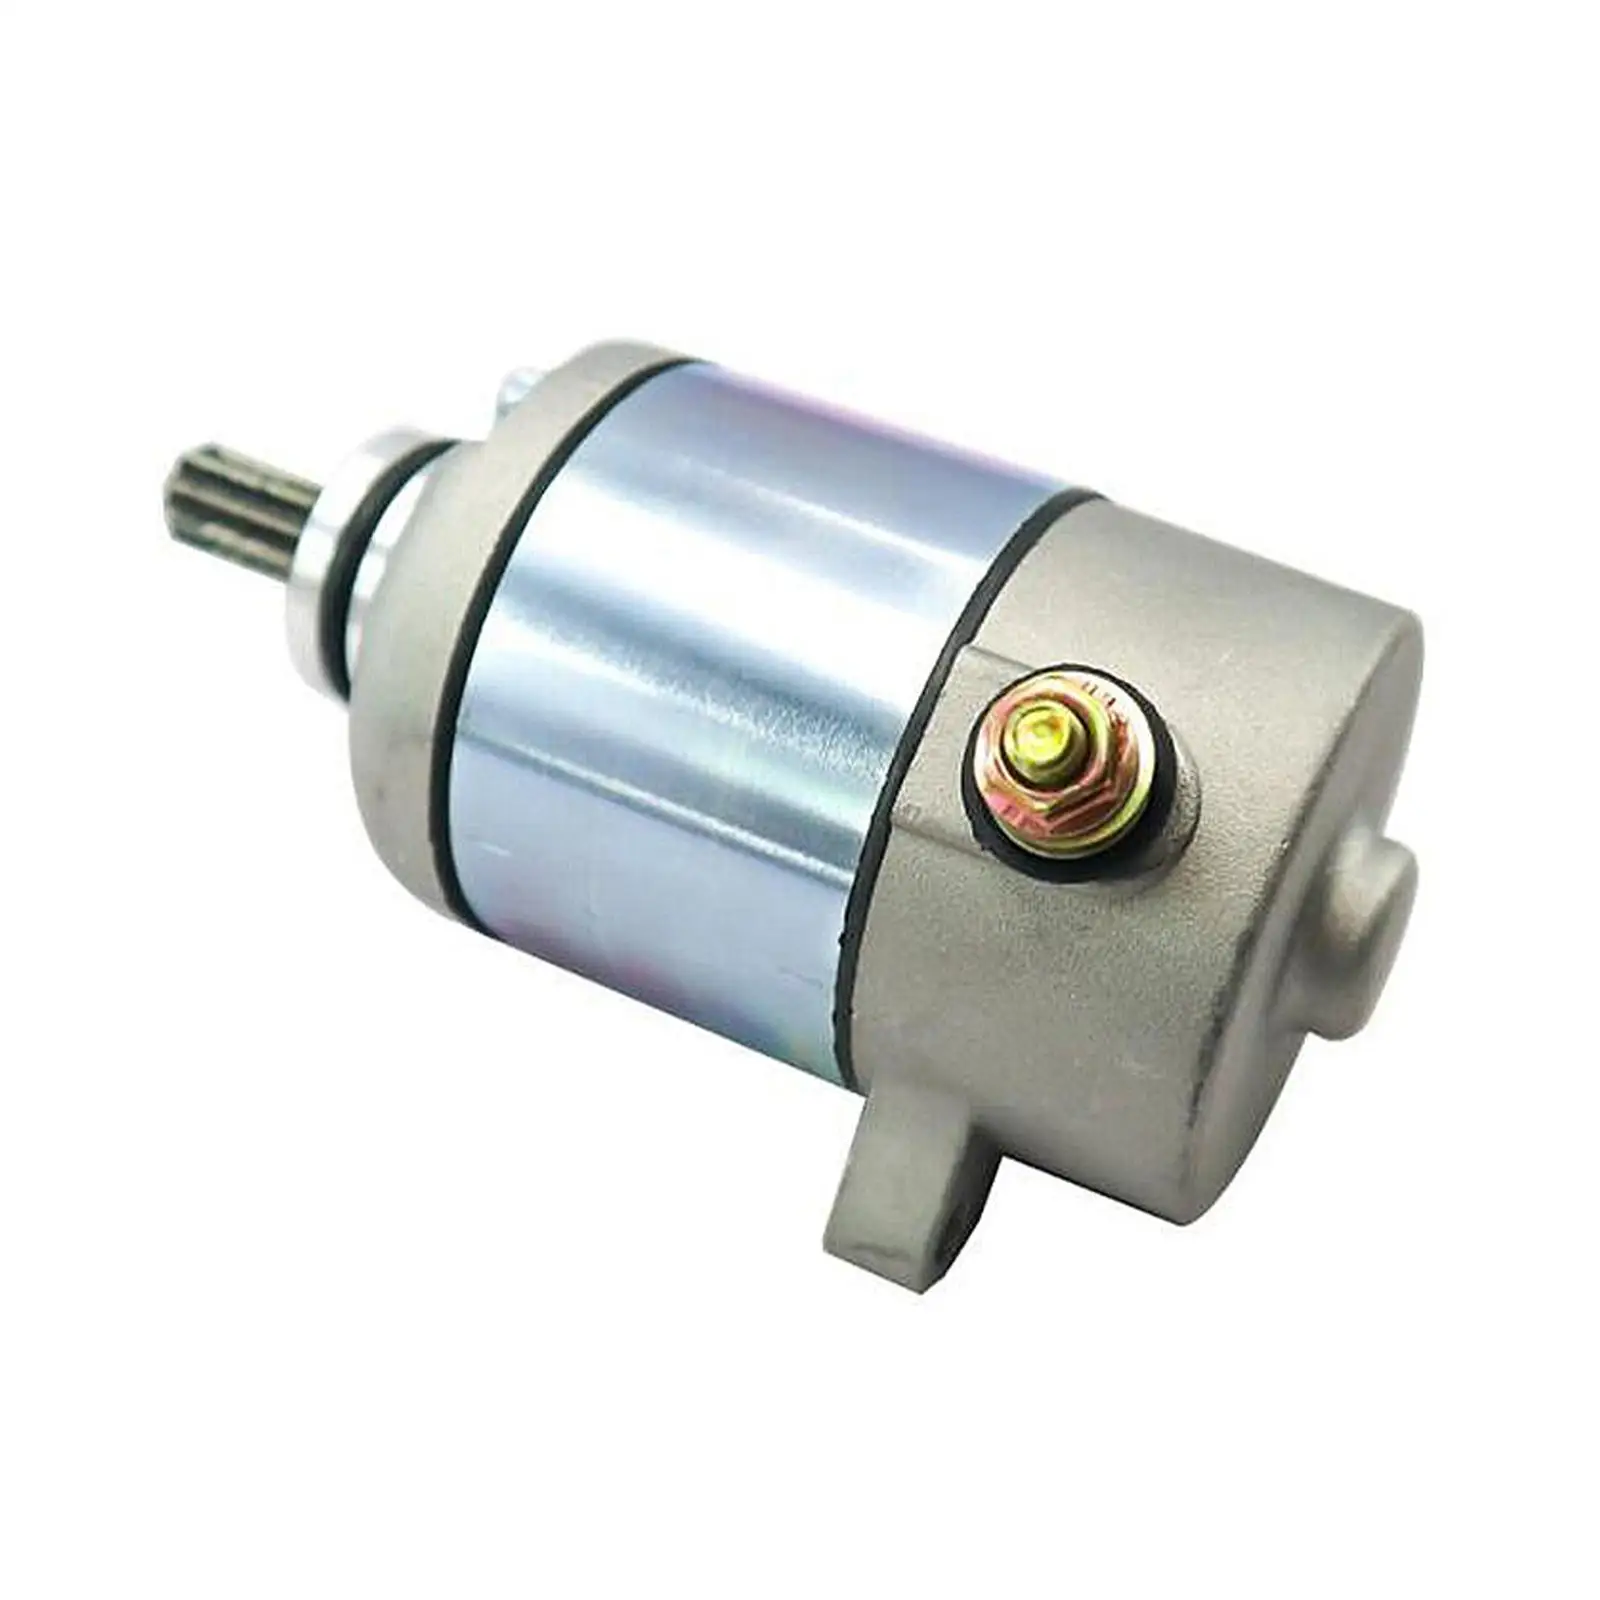 Electric Starter Motor Durable Premium High Performance Spare Parts Replacement Accessories for Honda Msx125 Wave 125